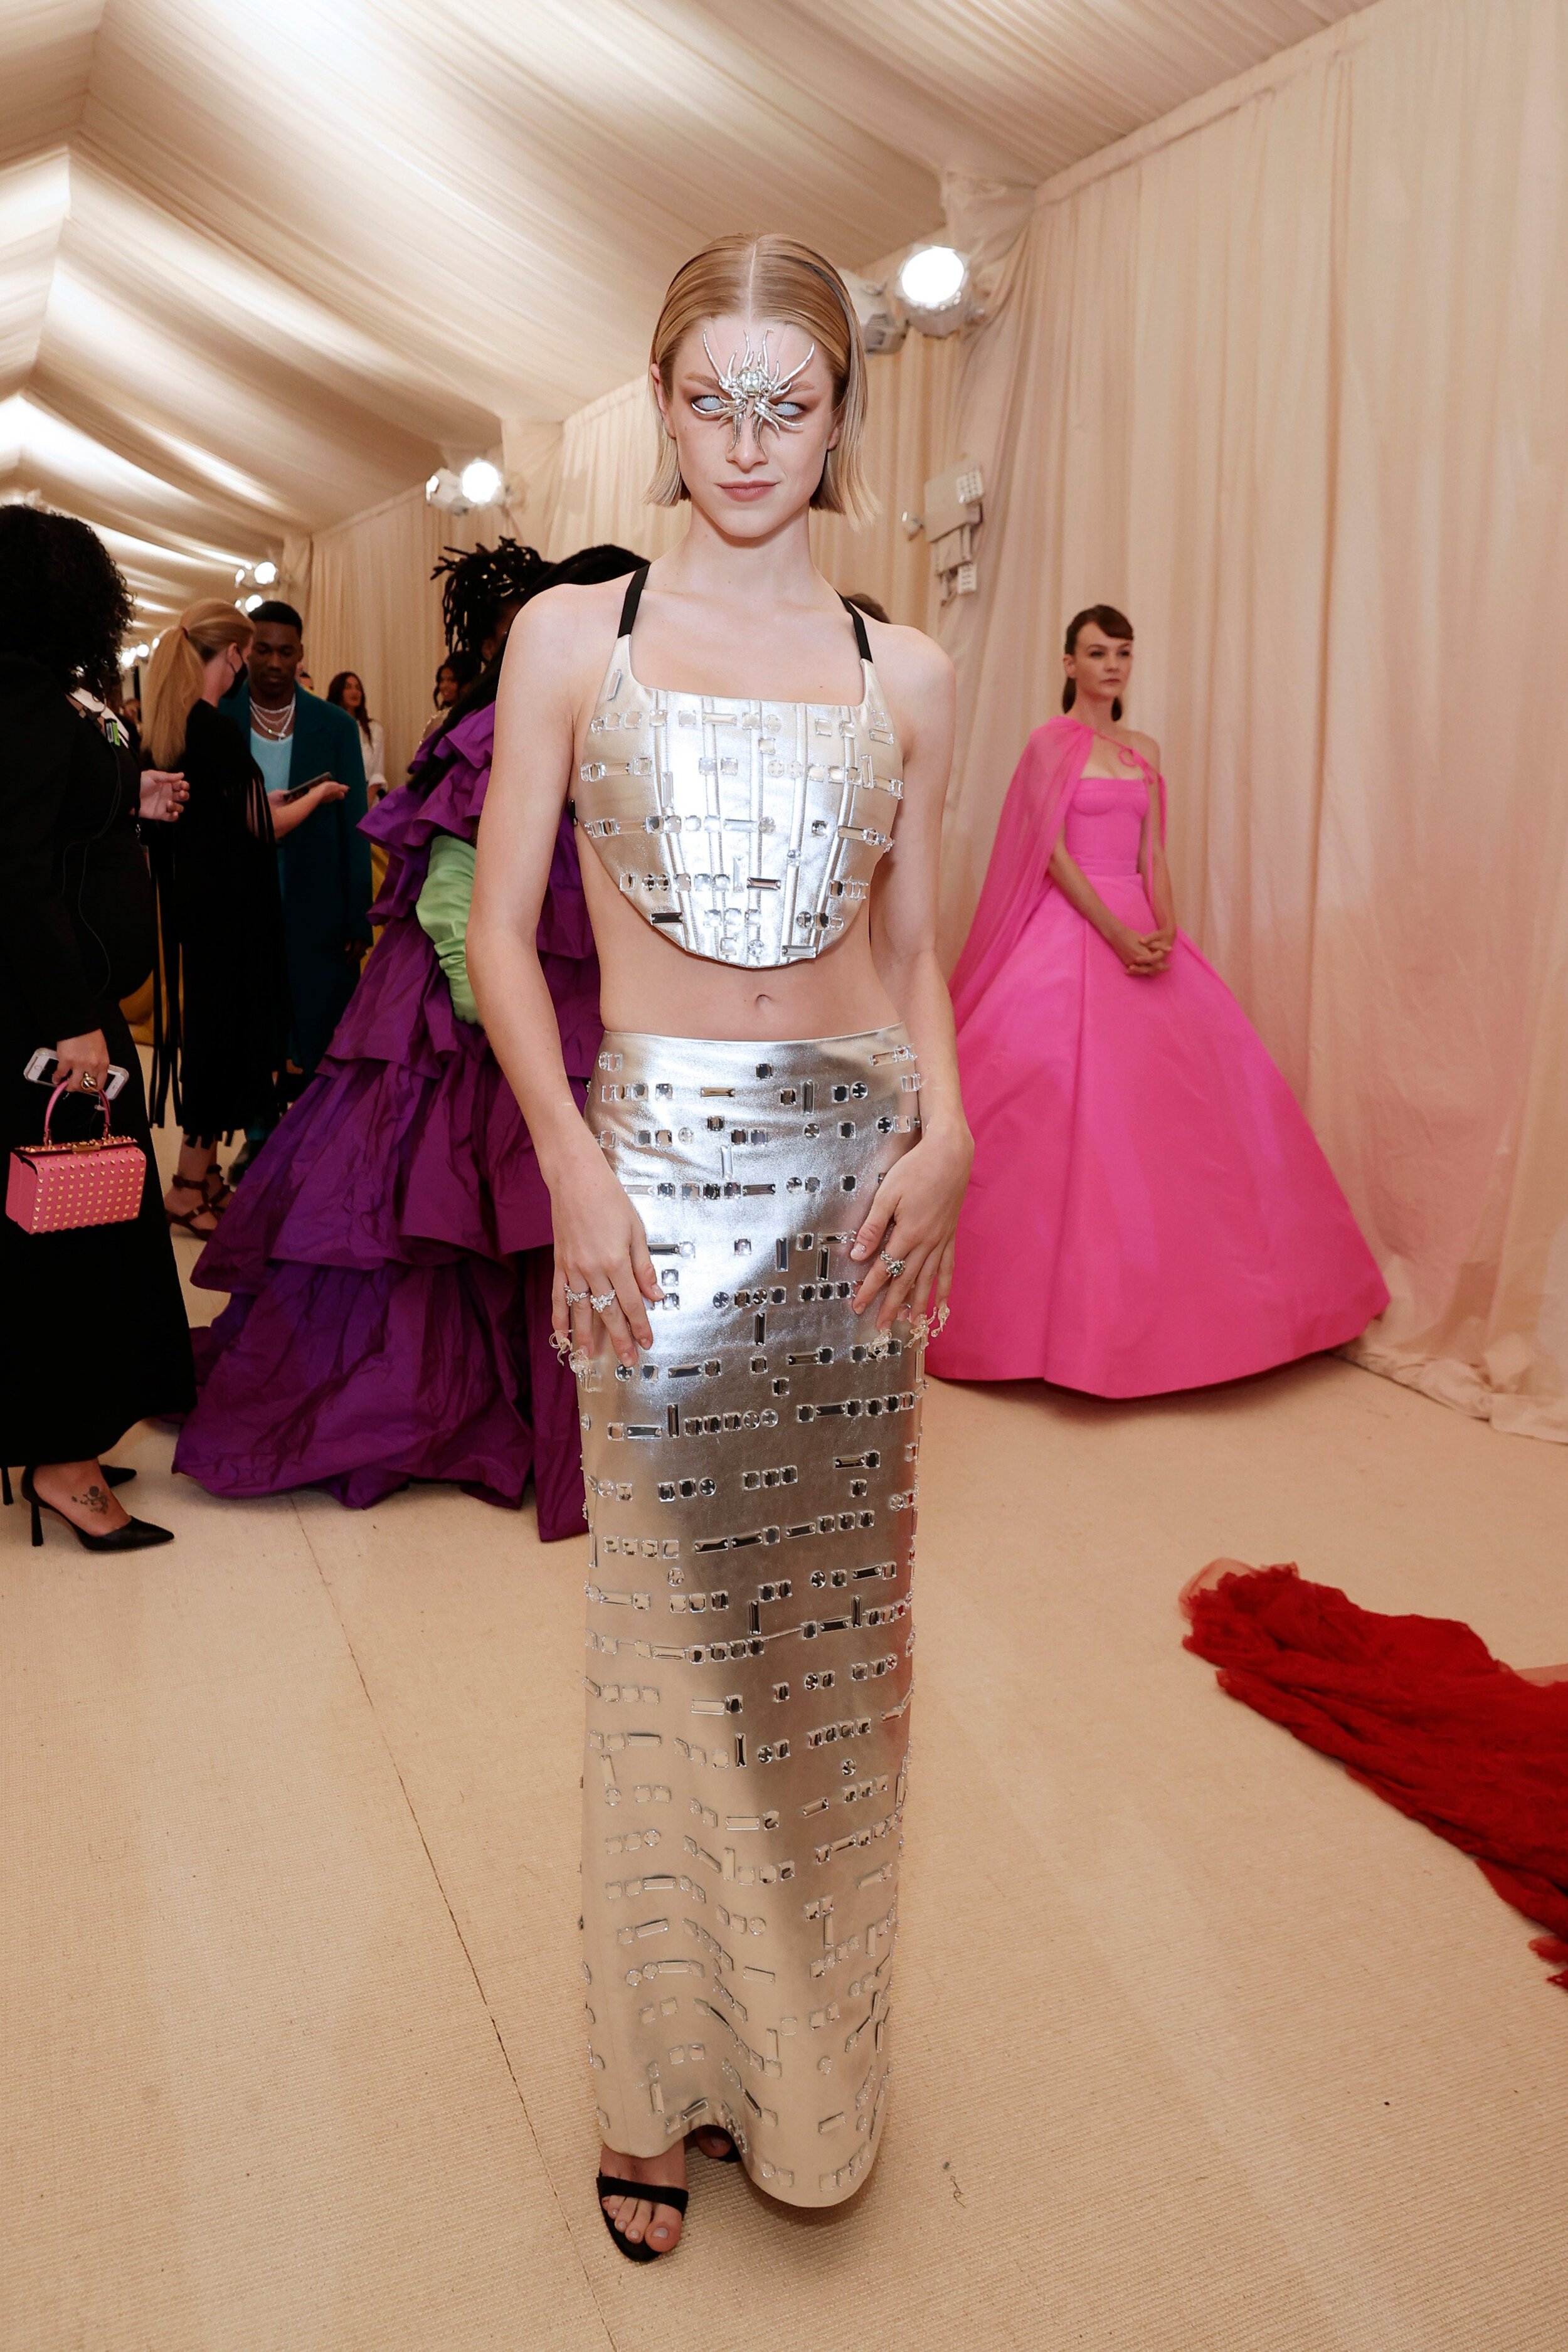 Christian Dior Haute Couture @ The 2021 Met Gala - Red Carpet